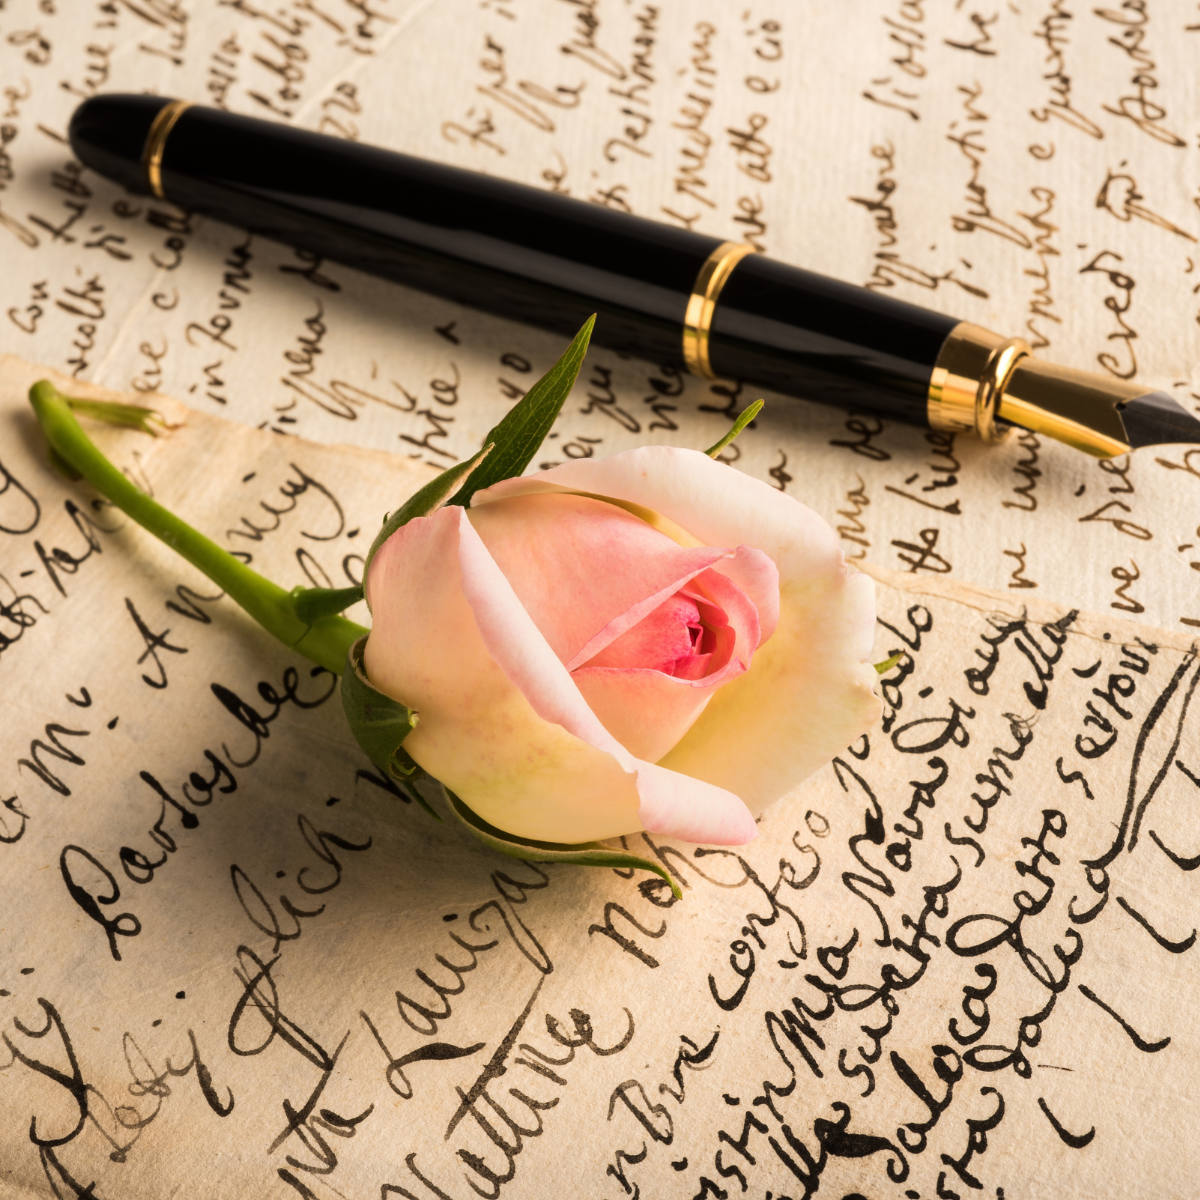 32. Capture Your Love Story: Give Him a Handwritten Love Letter for Your 10th Anniversary